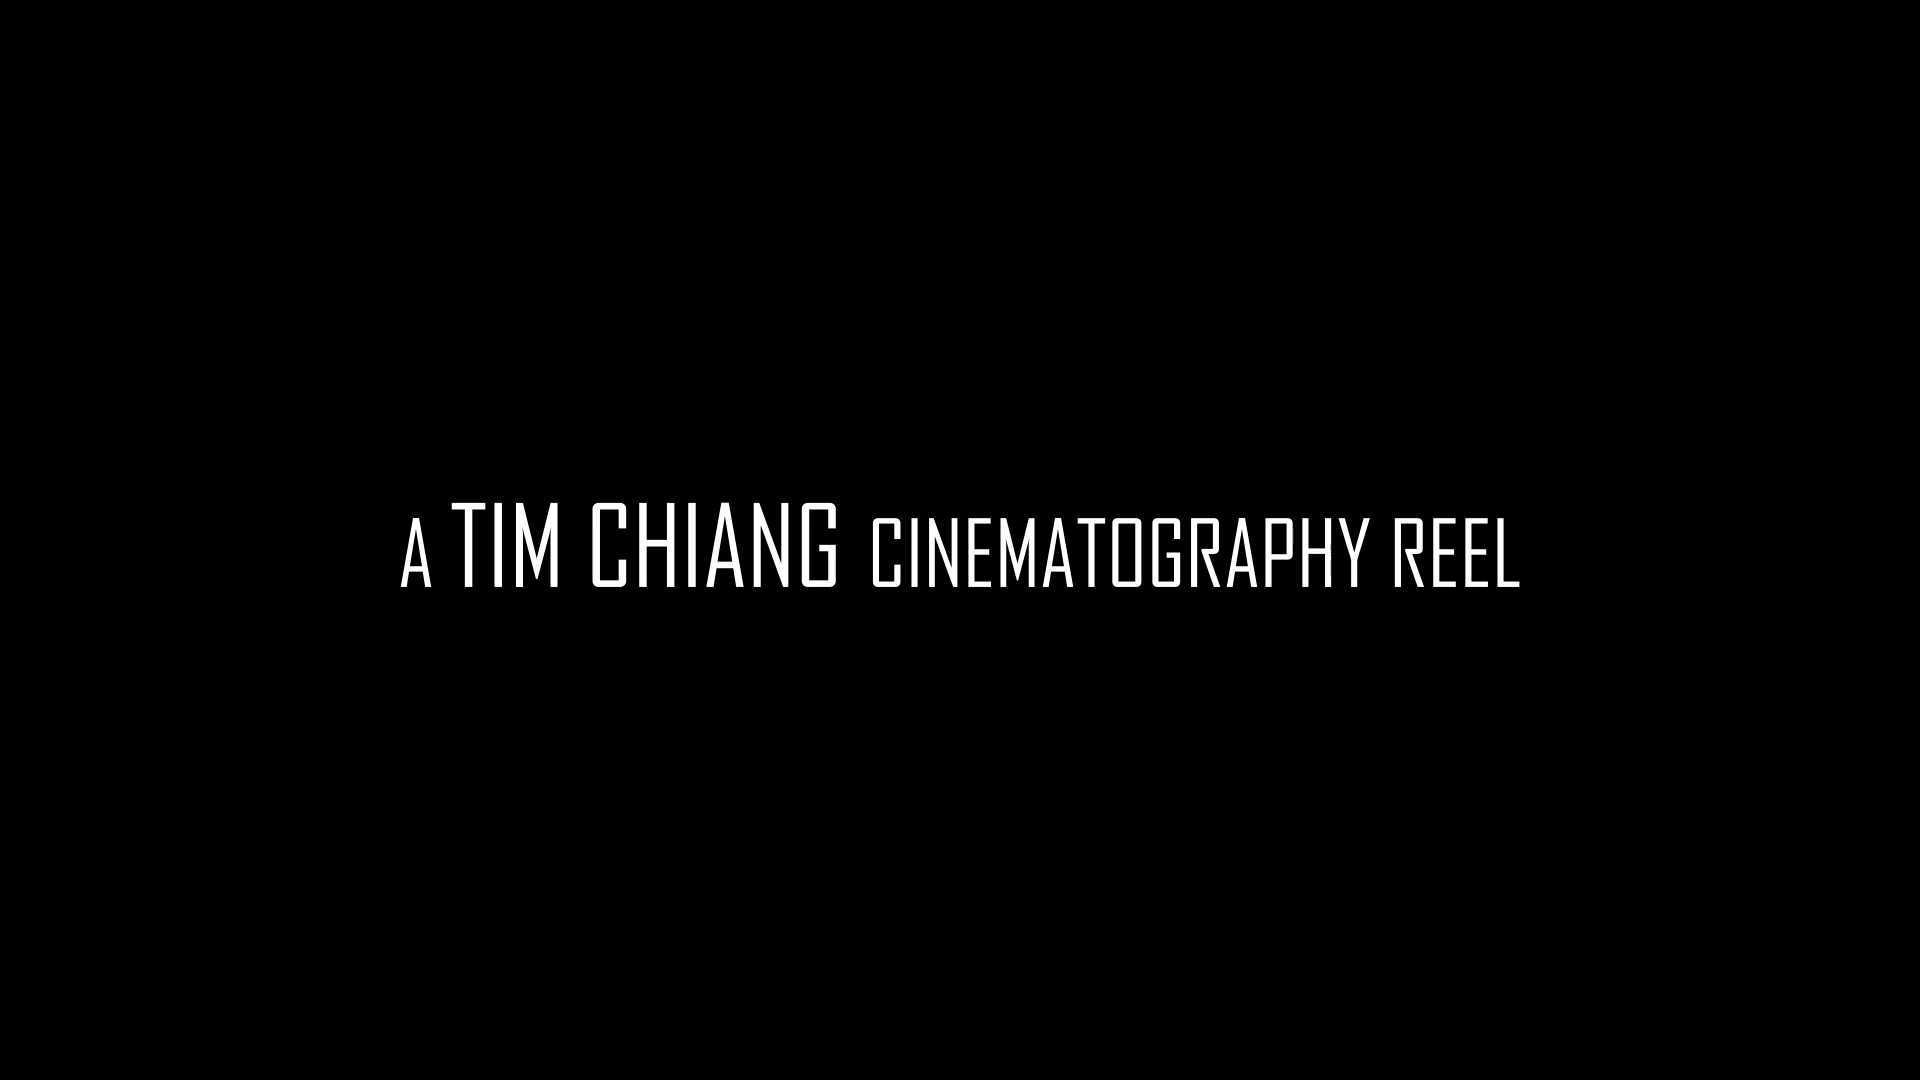 A Tim Chiang Cinematography Reel